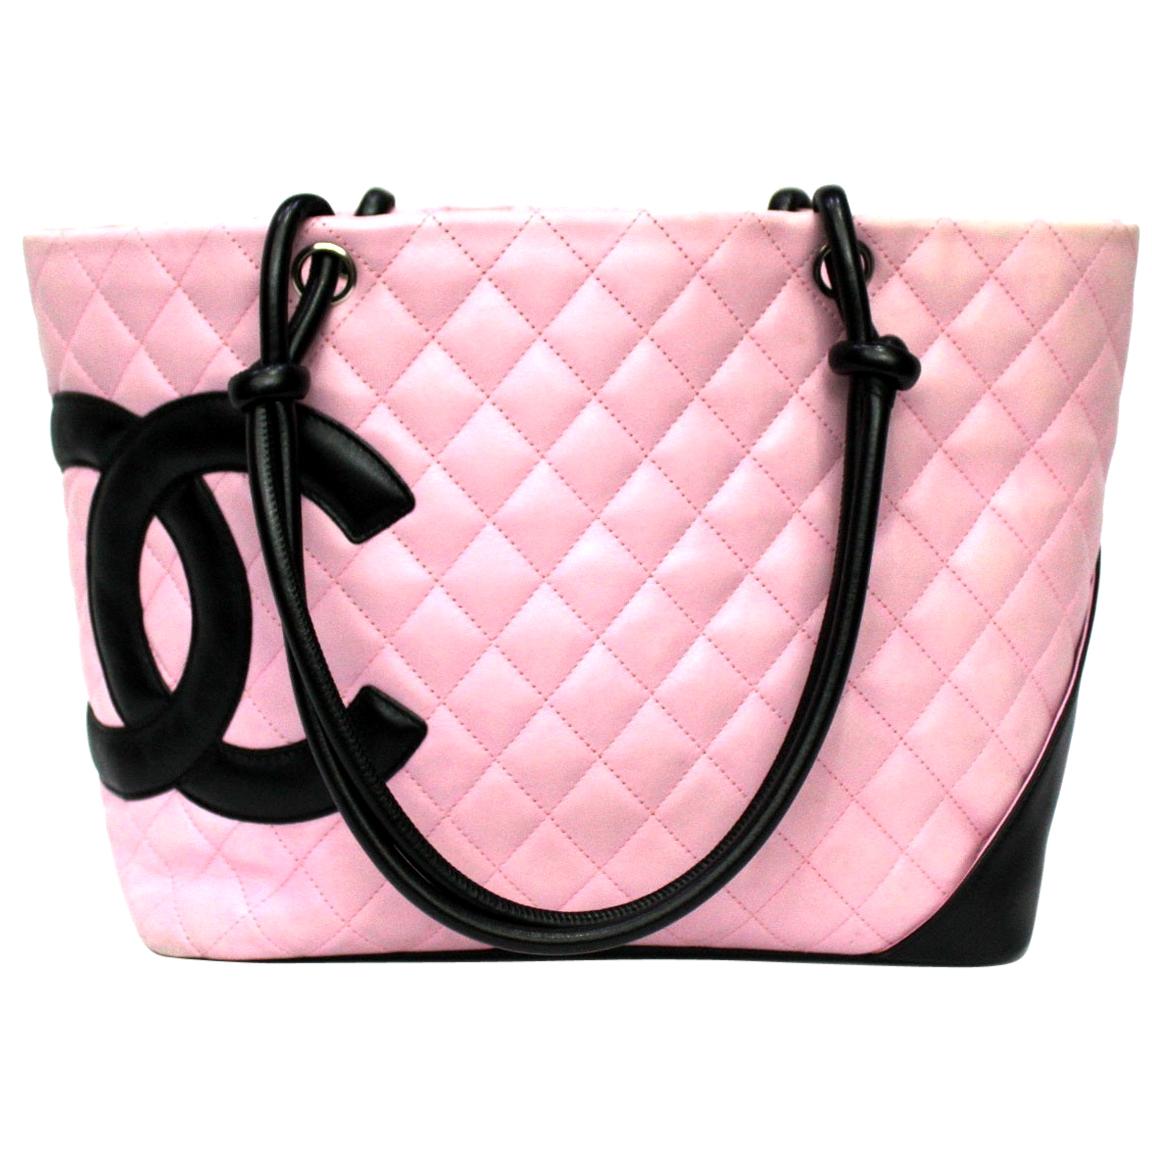 Chanel Pink Leather Cambon Bag